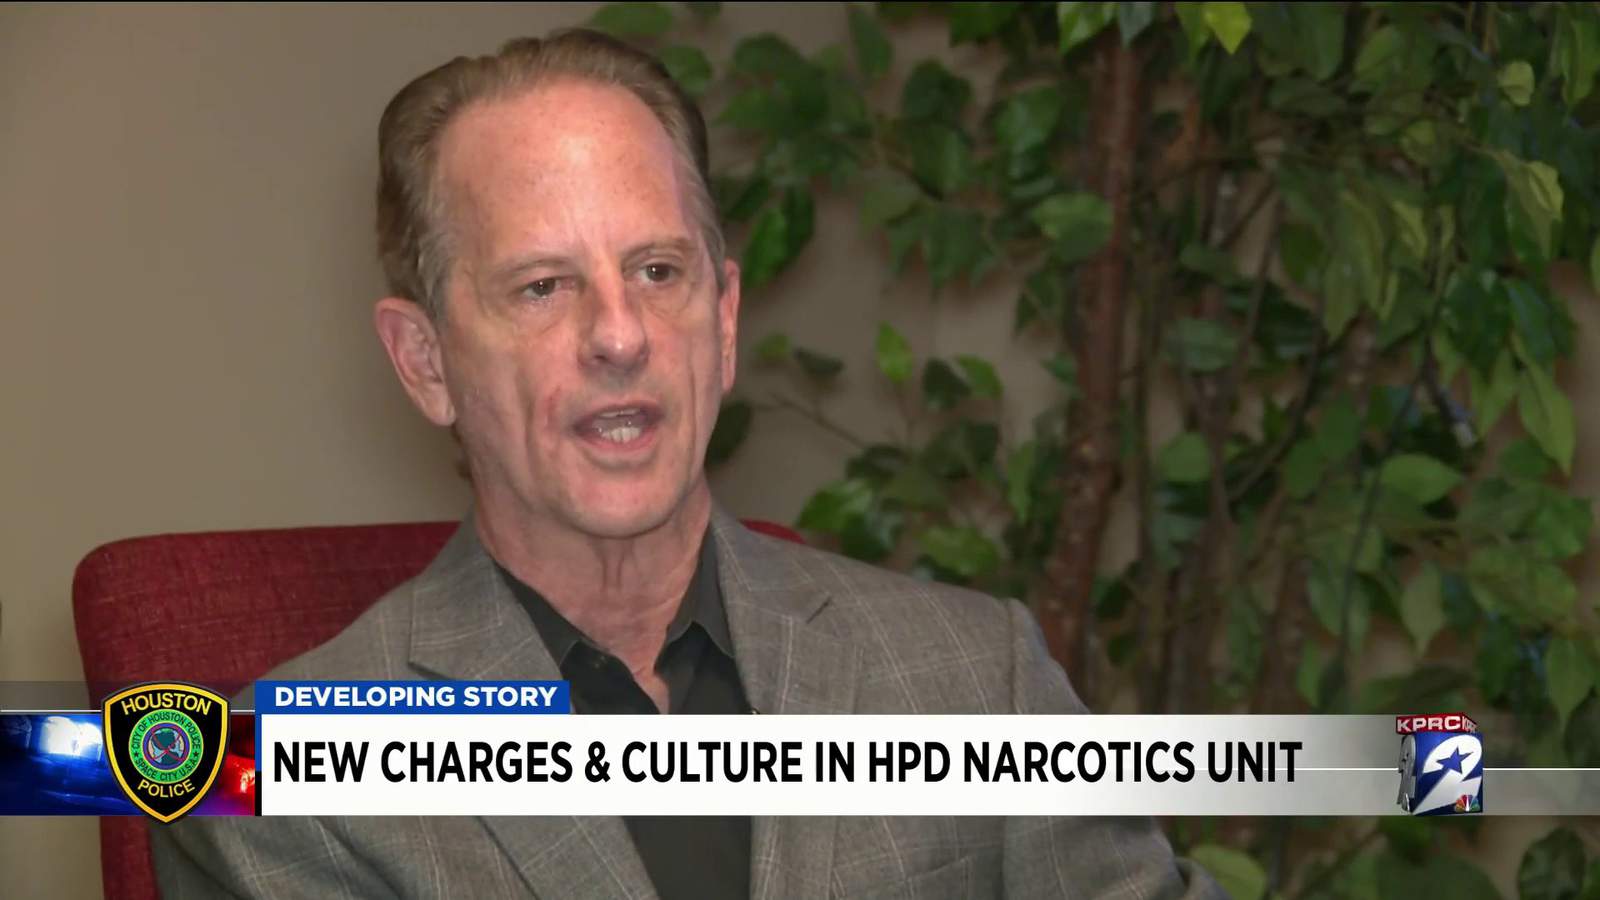 New charges illustrate culture within HPD Narcotics unit, legal analyst says